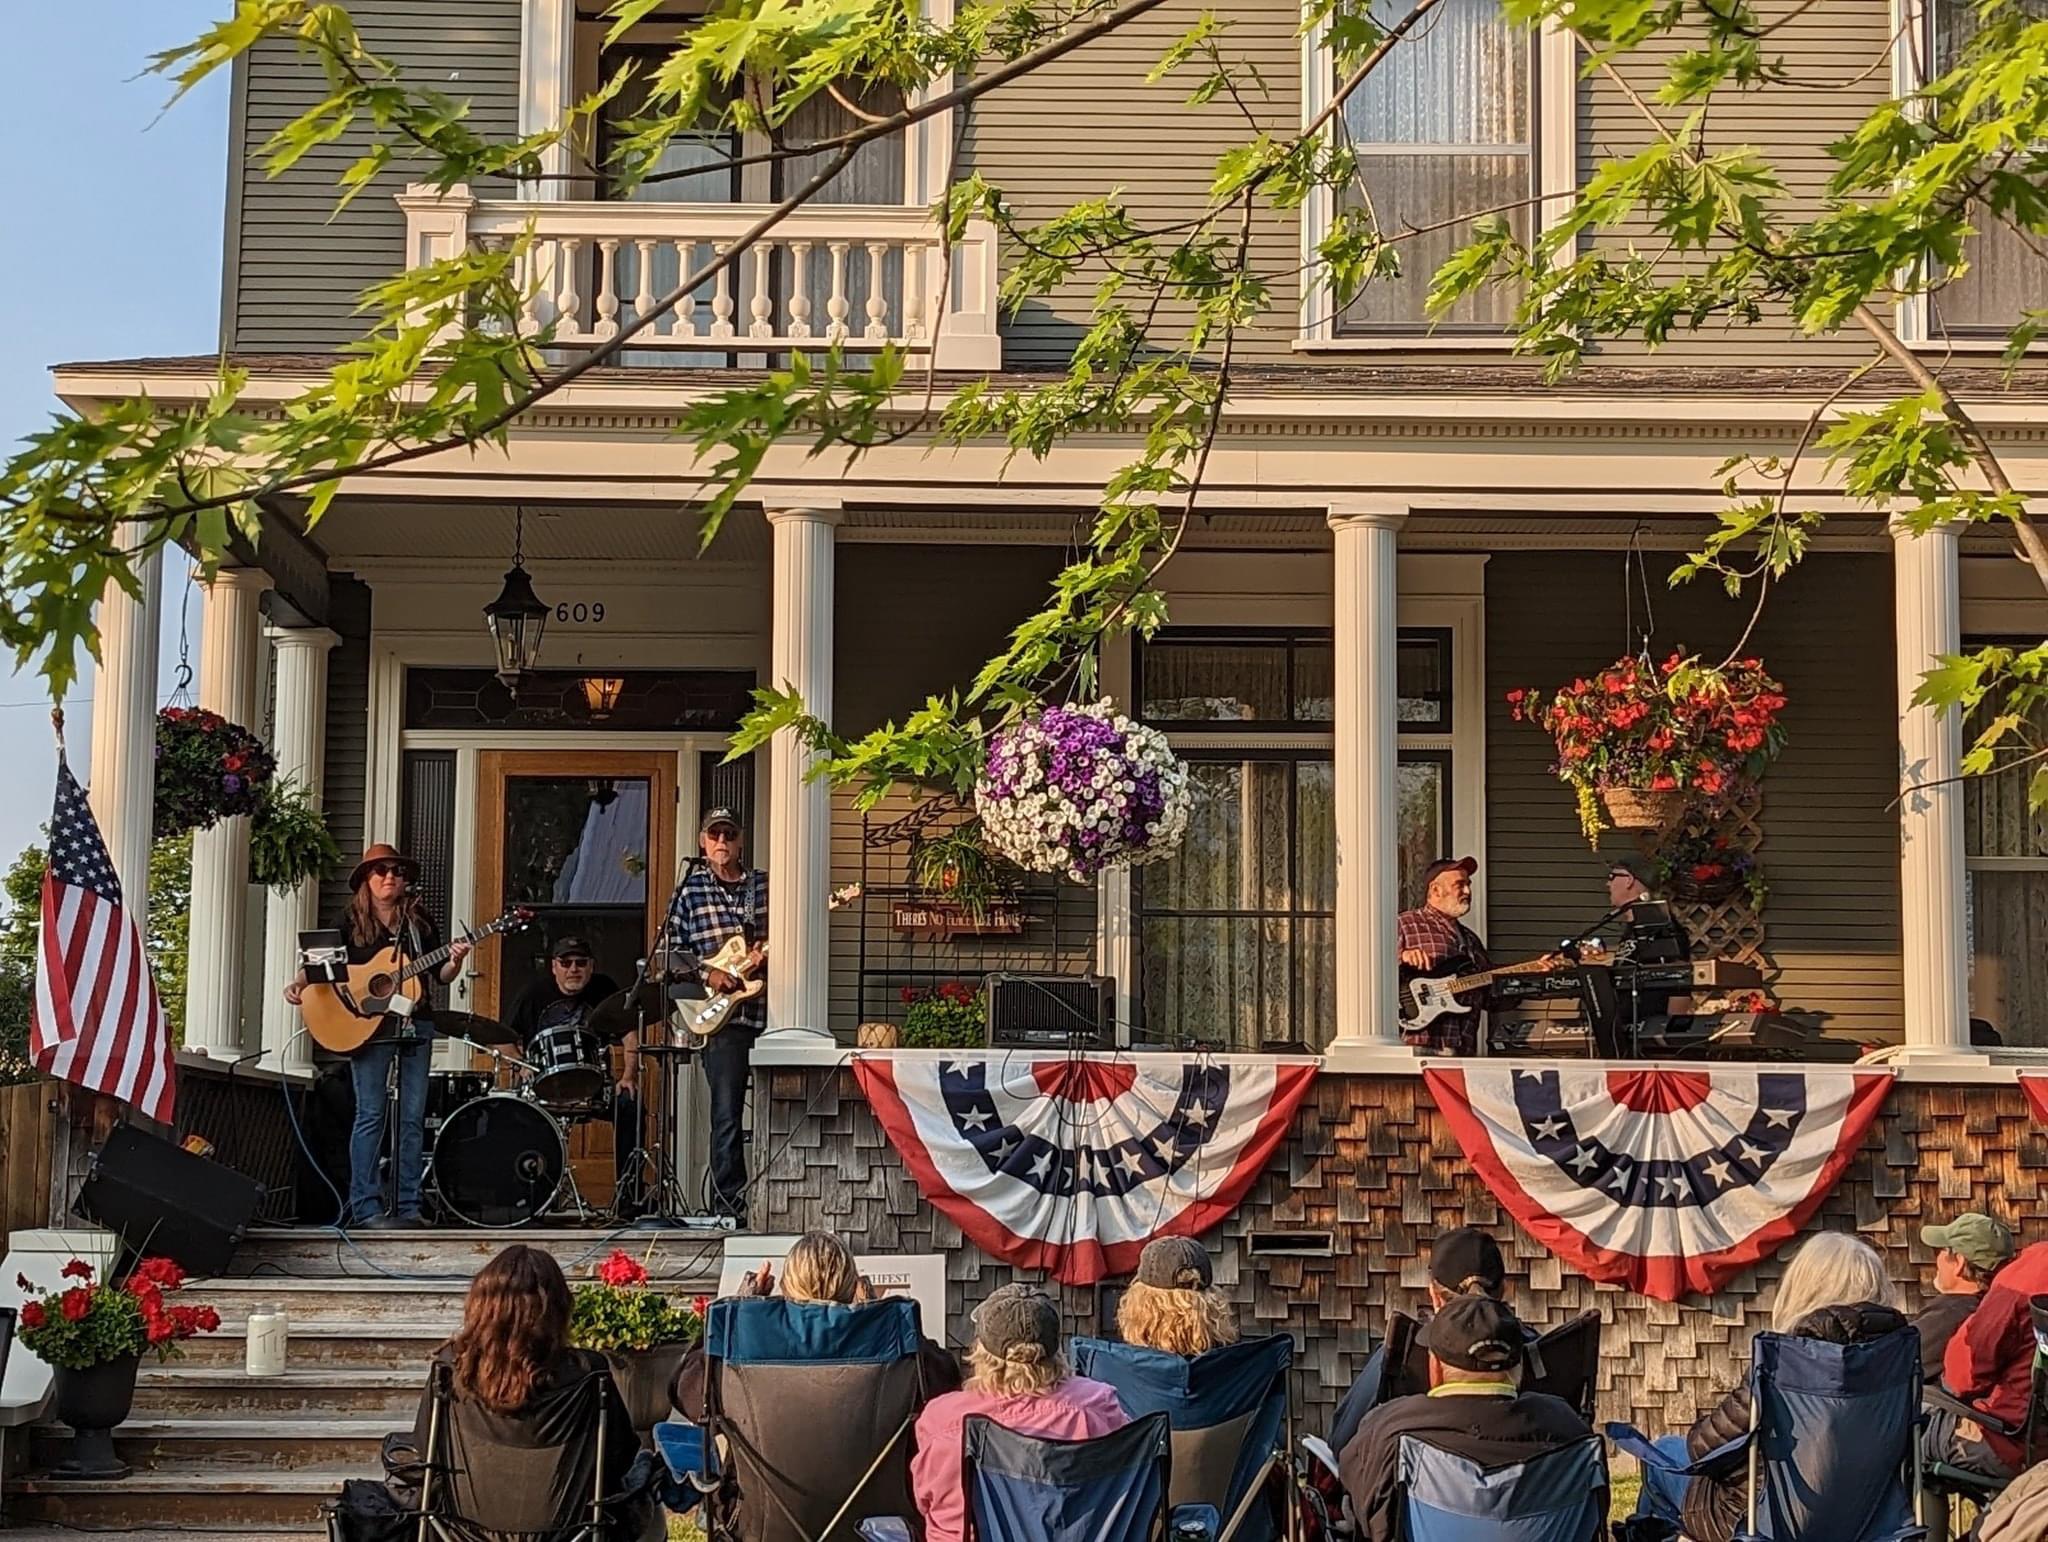 In Superior, concerts are playing on a porch near you